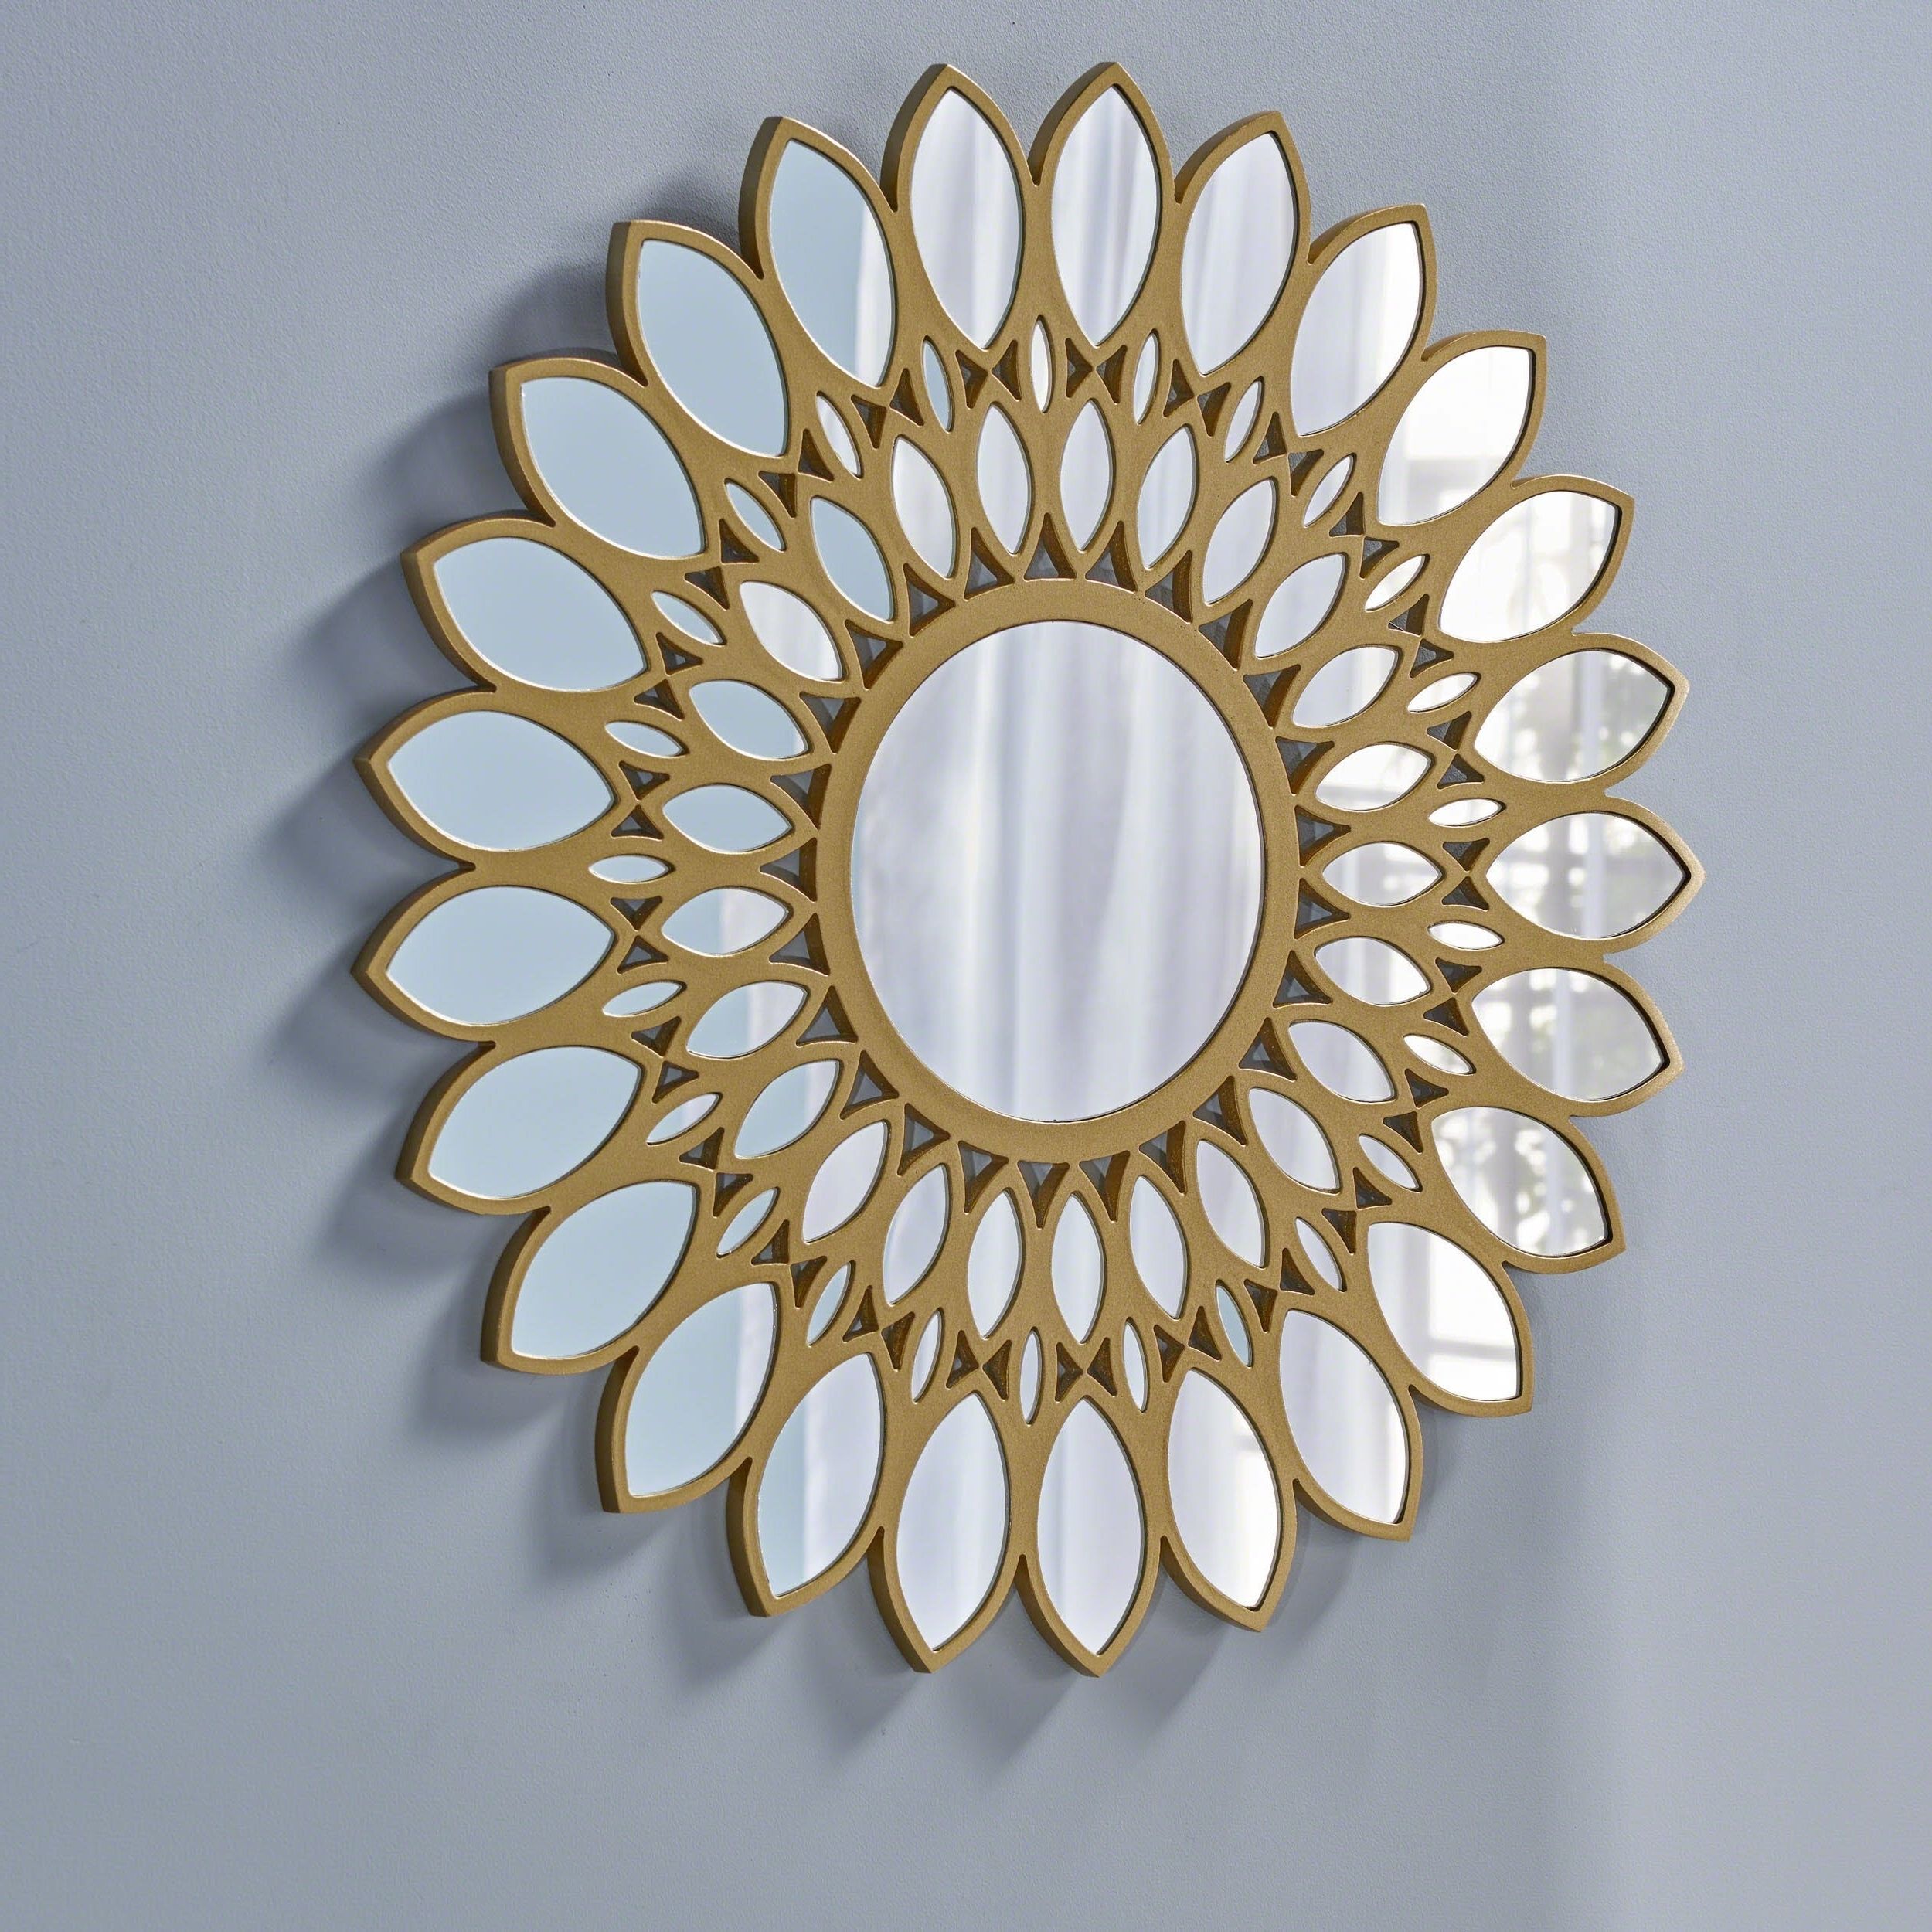 Antares Glam Flower Wall Mirrorchristopher Knight Home – Gold With Regard To 2020 Flower Wall Mirrors (View 9 of 20)